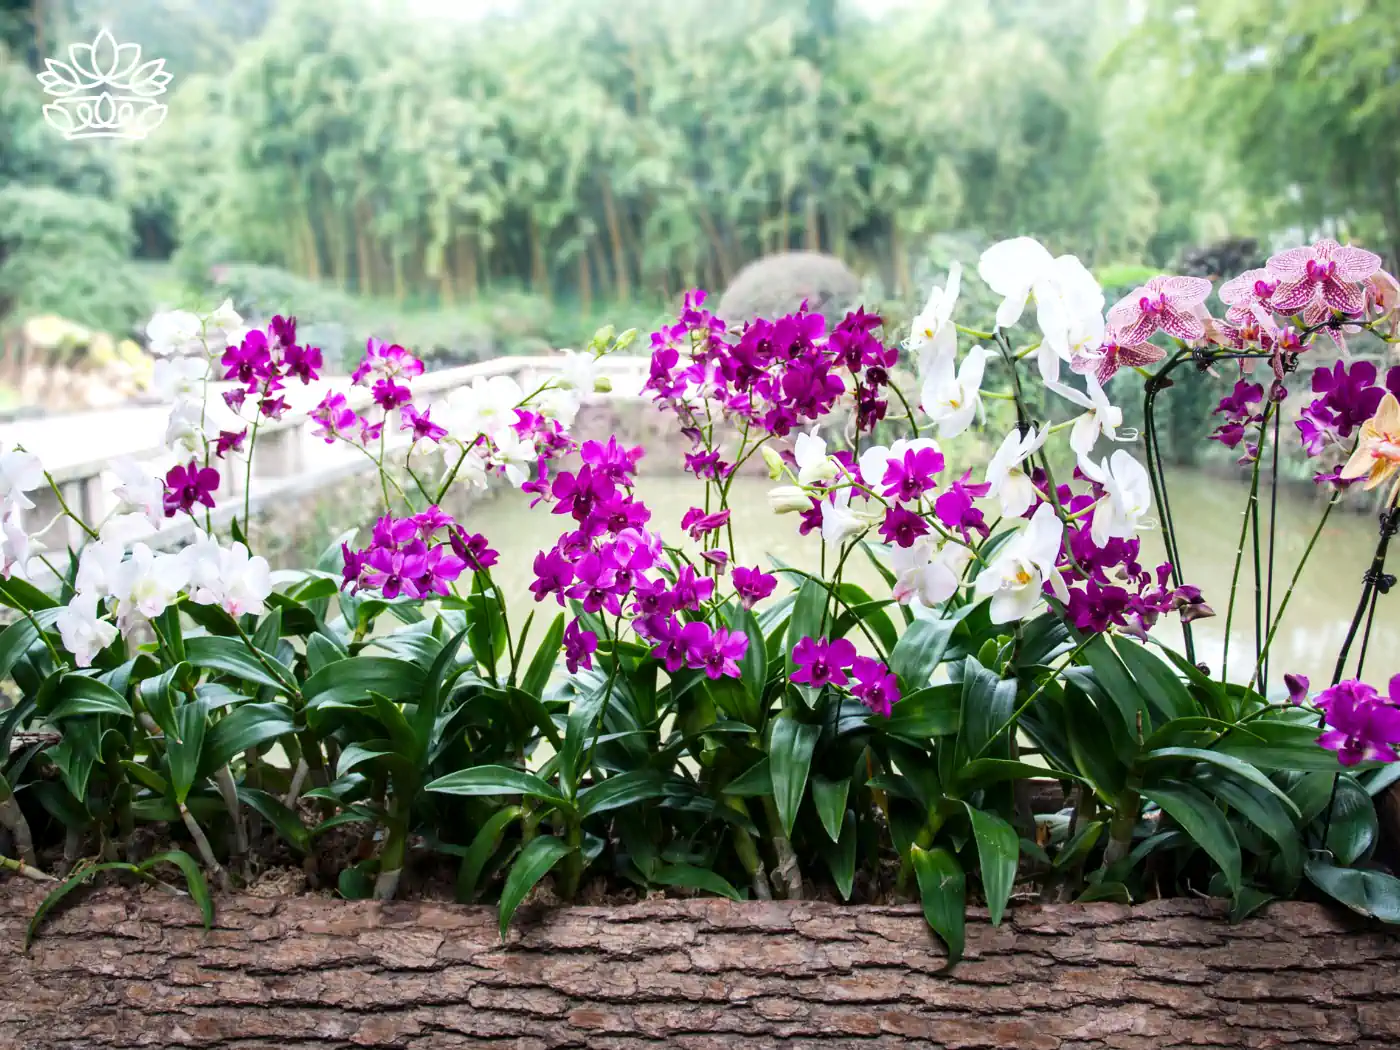 A garden bed filled with vibrant pink, purple, and white orchids in full bloom. Fabulous Flowers and Gifts - Orchids Collection.